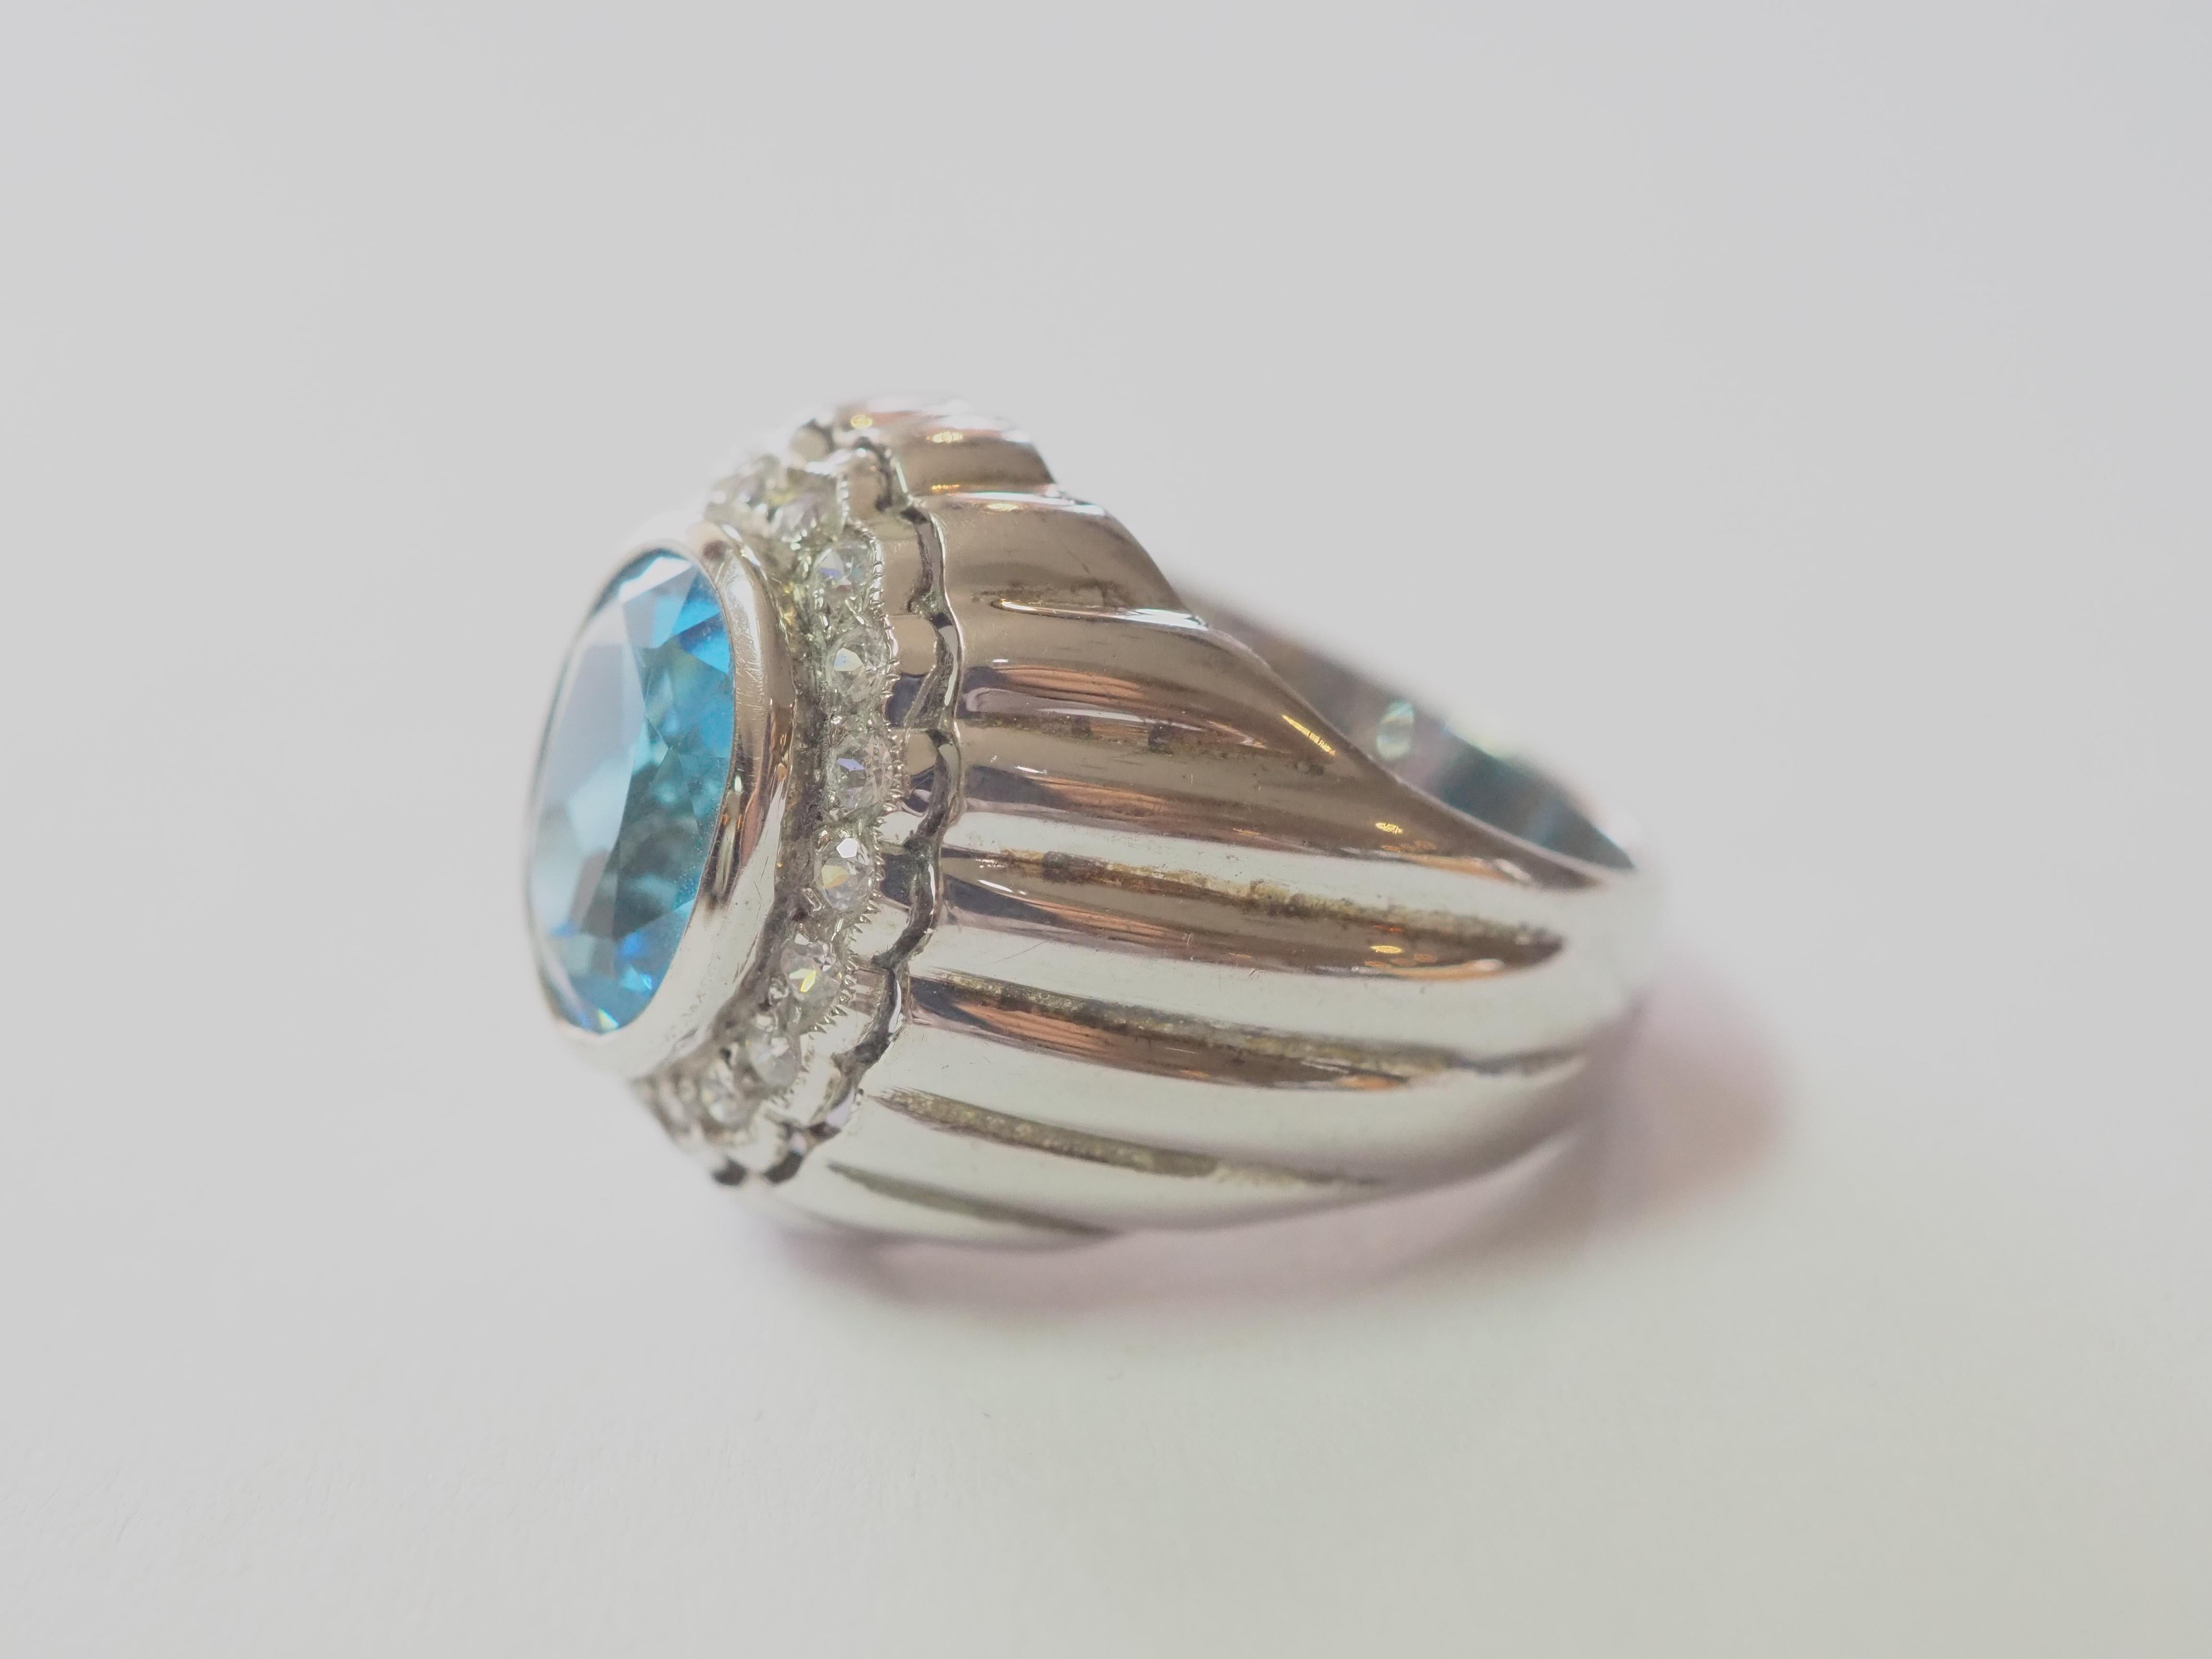 This ring is a statement signet Trombino ring in solid sterling silver. The ring is decorated by natural oval blue topaz bezel set in the middle. The surrounding white stones are cubic zirconia. The engraving pattern on the band is delicately carved